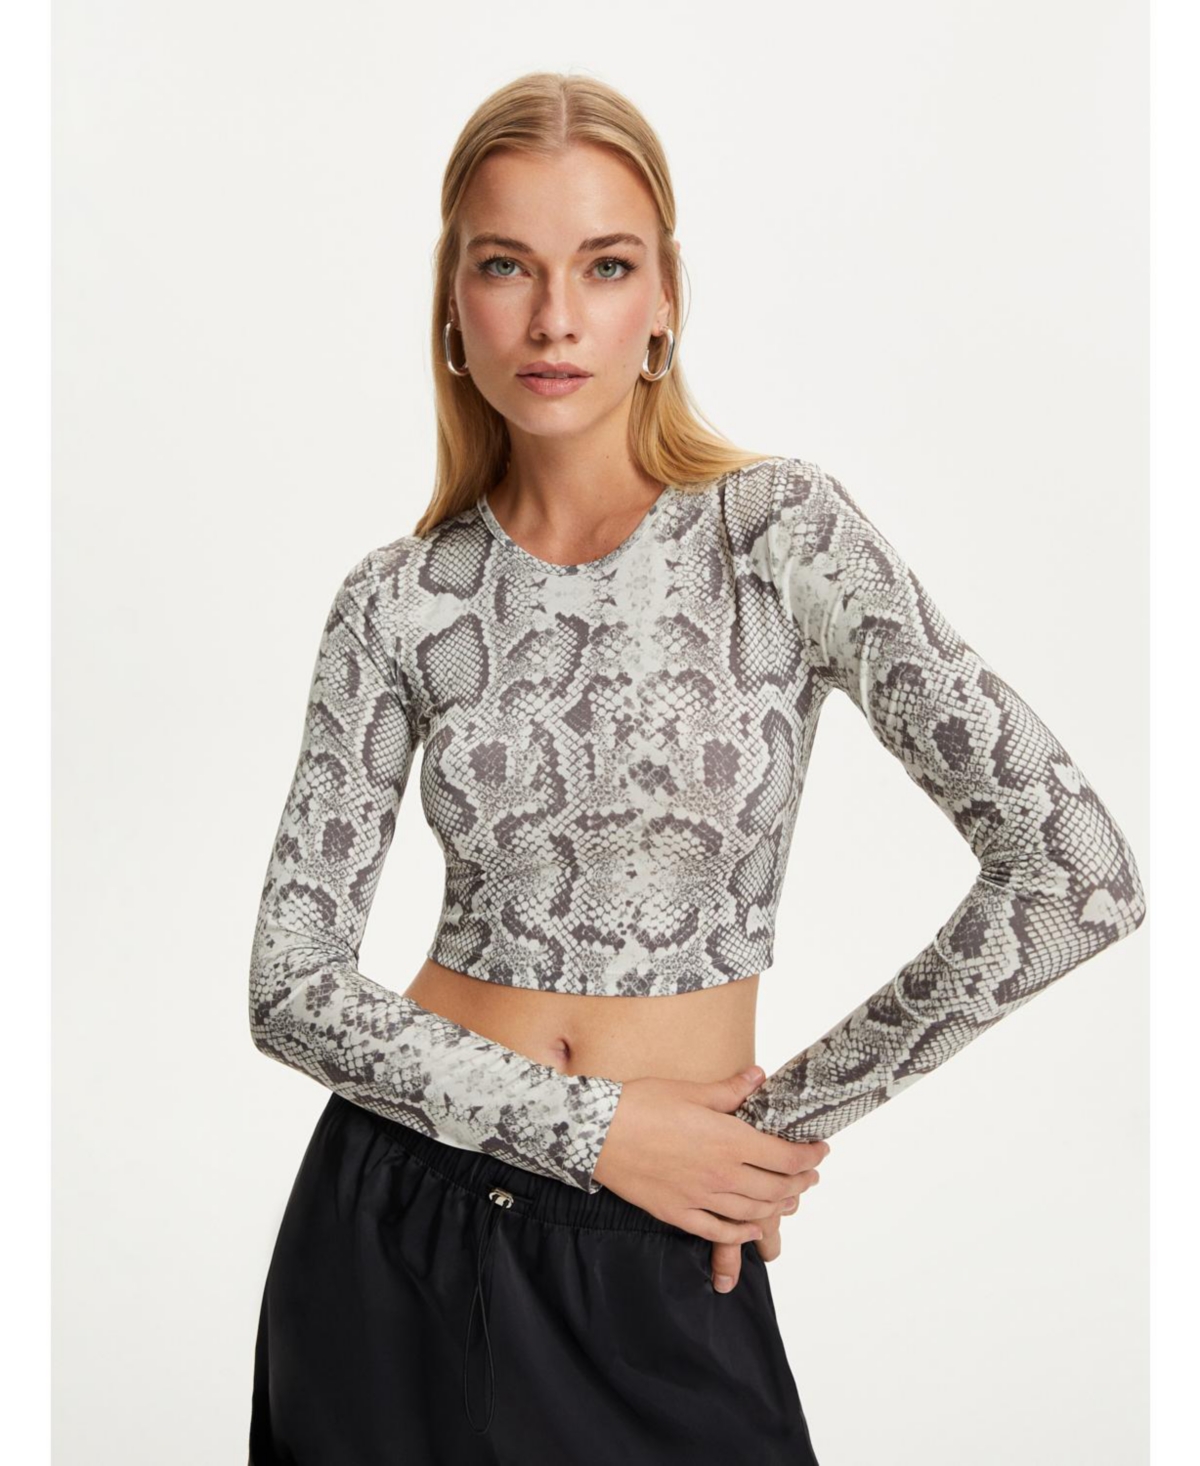 NOCTURNE WOMEN'S SILVER SNAKE PRINTED CROP TOP